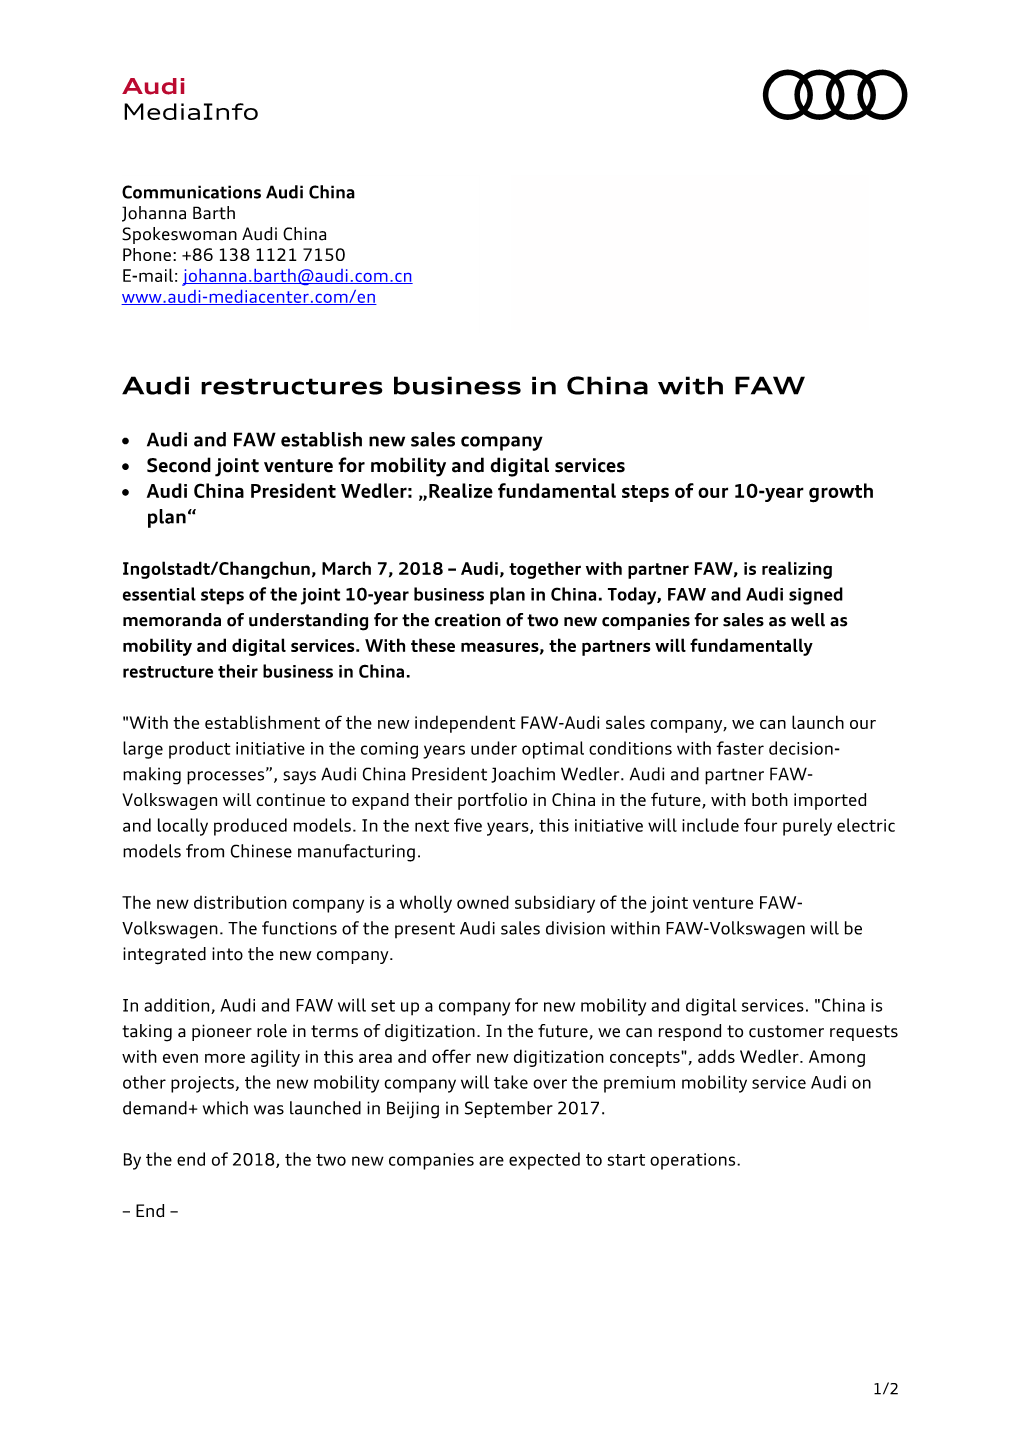 Audi Restructures Business in China with FAW